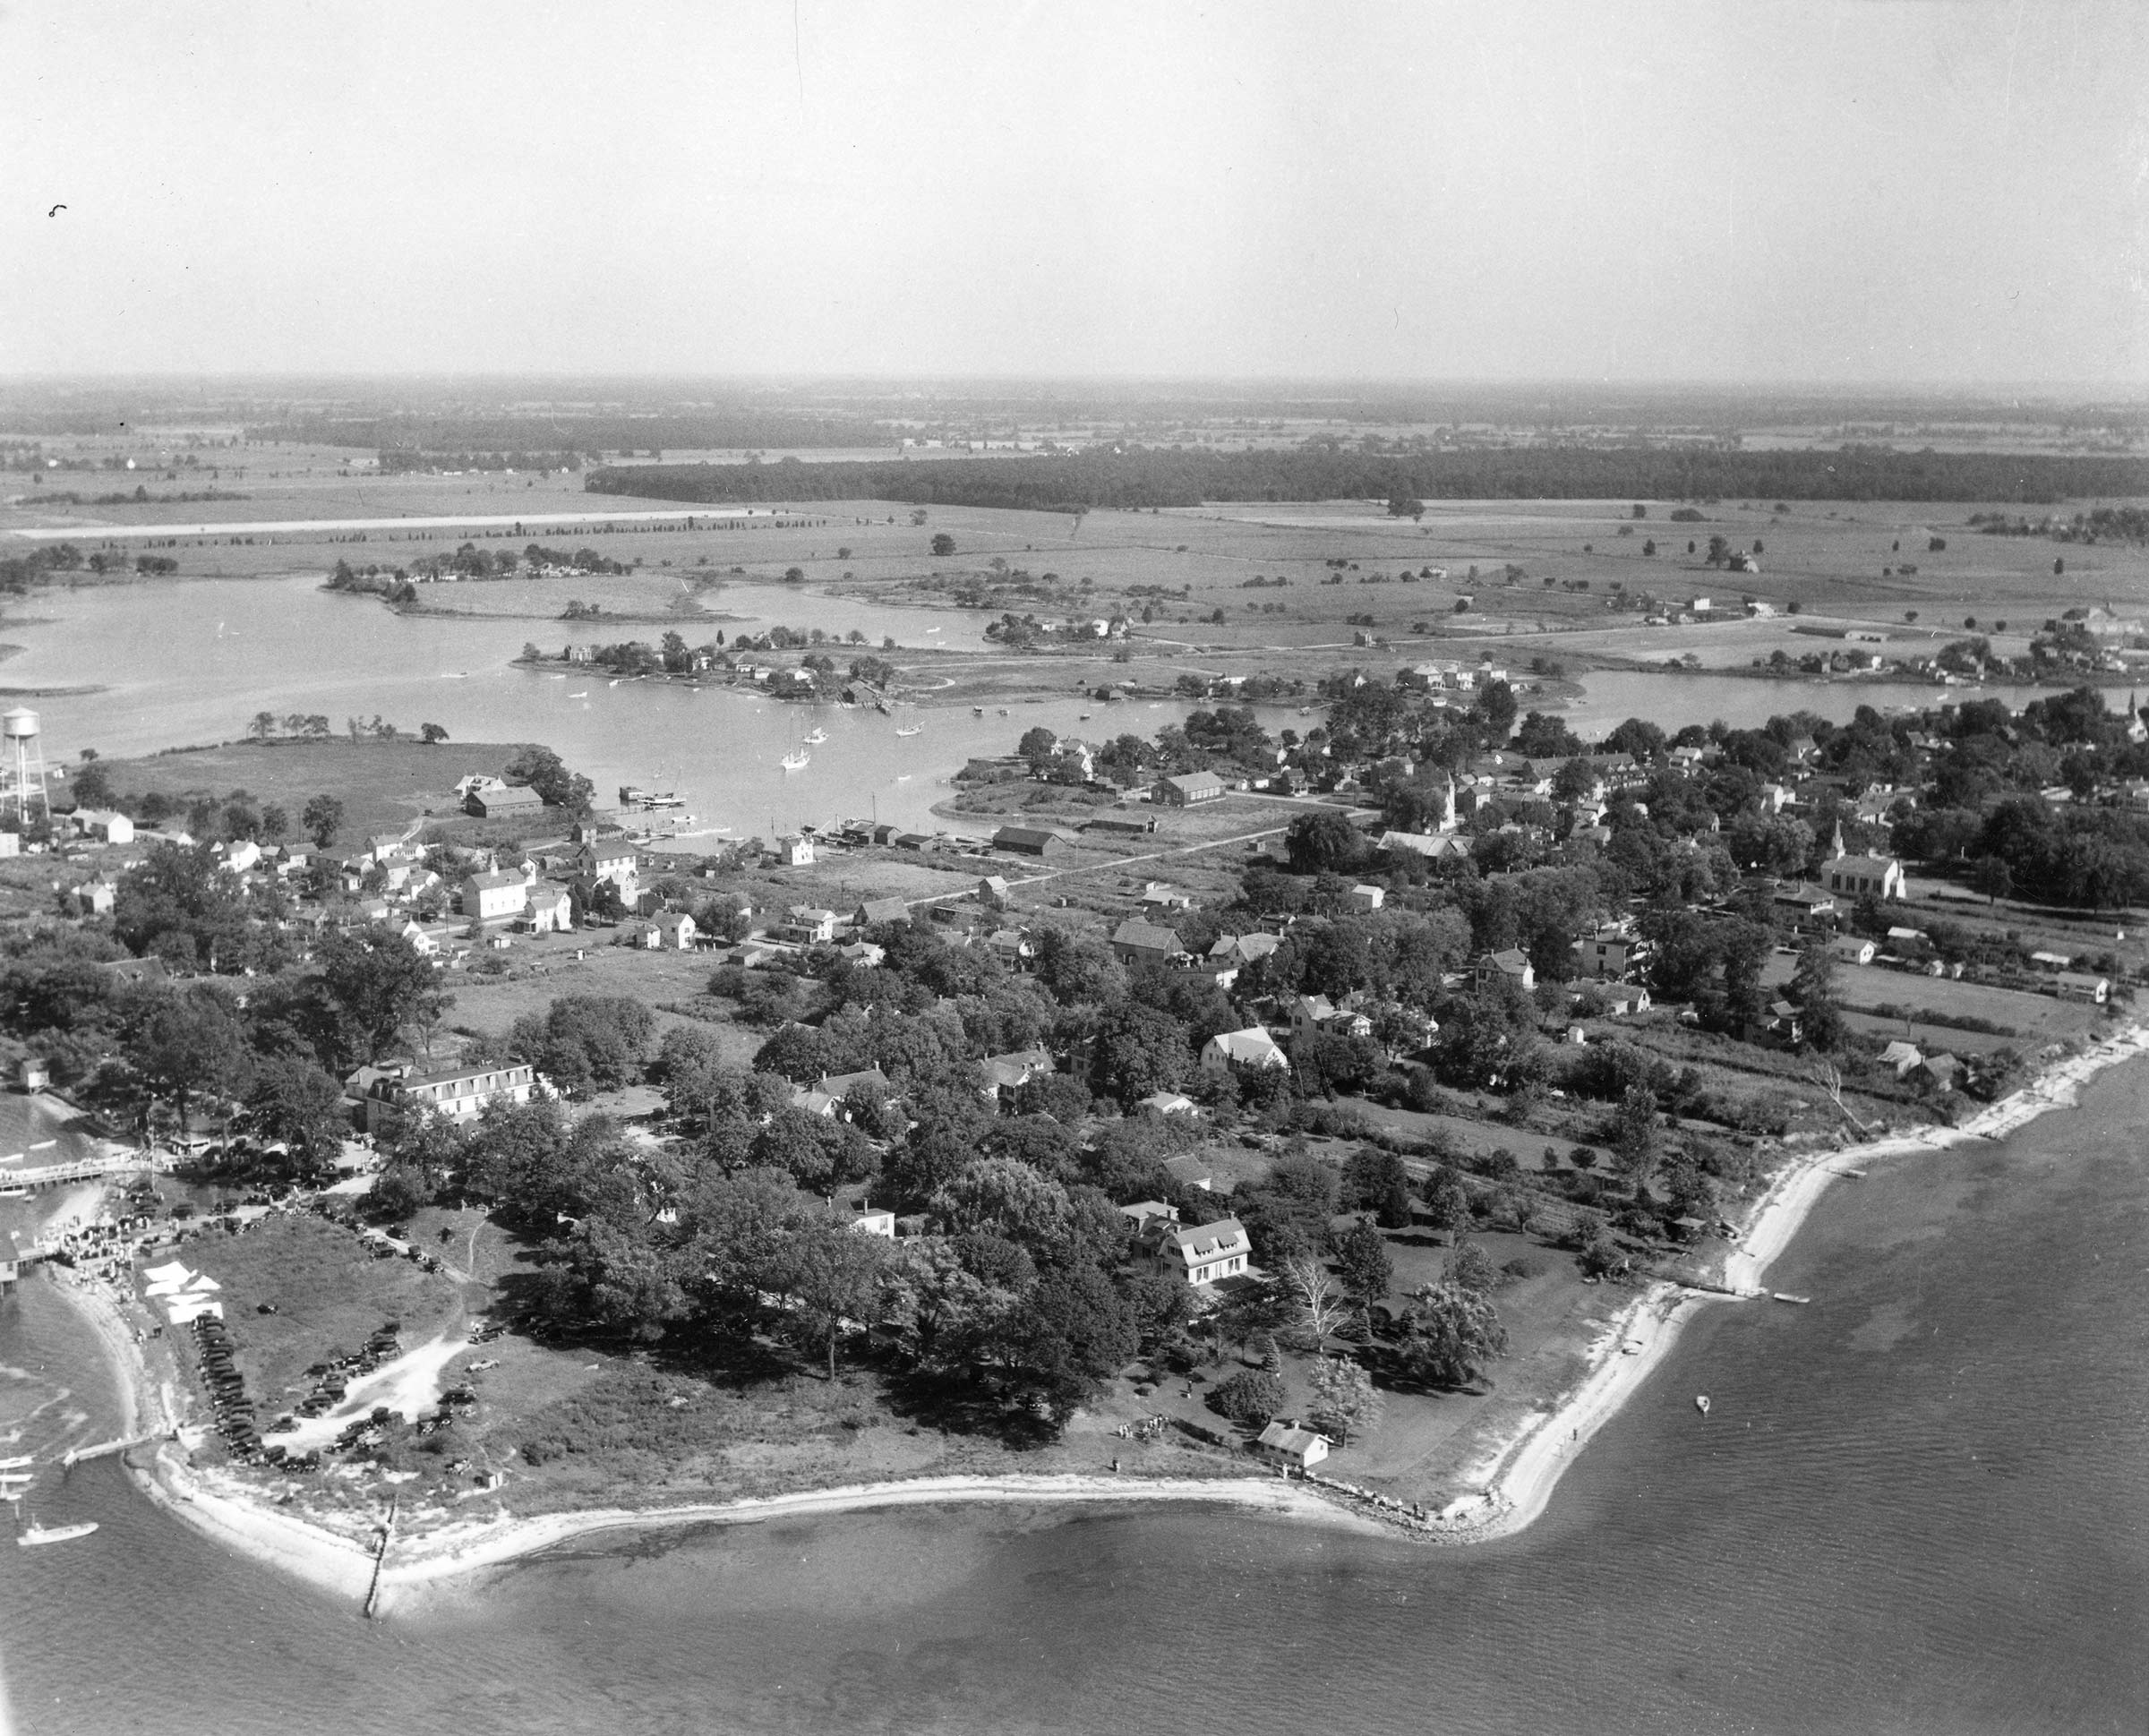 Aerial photo of Oxford, Maryland showing the town and beaches.